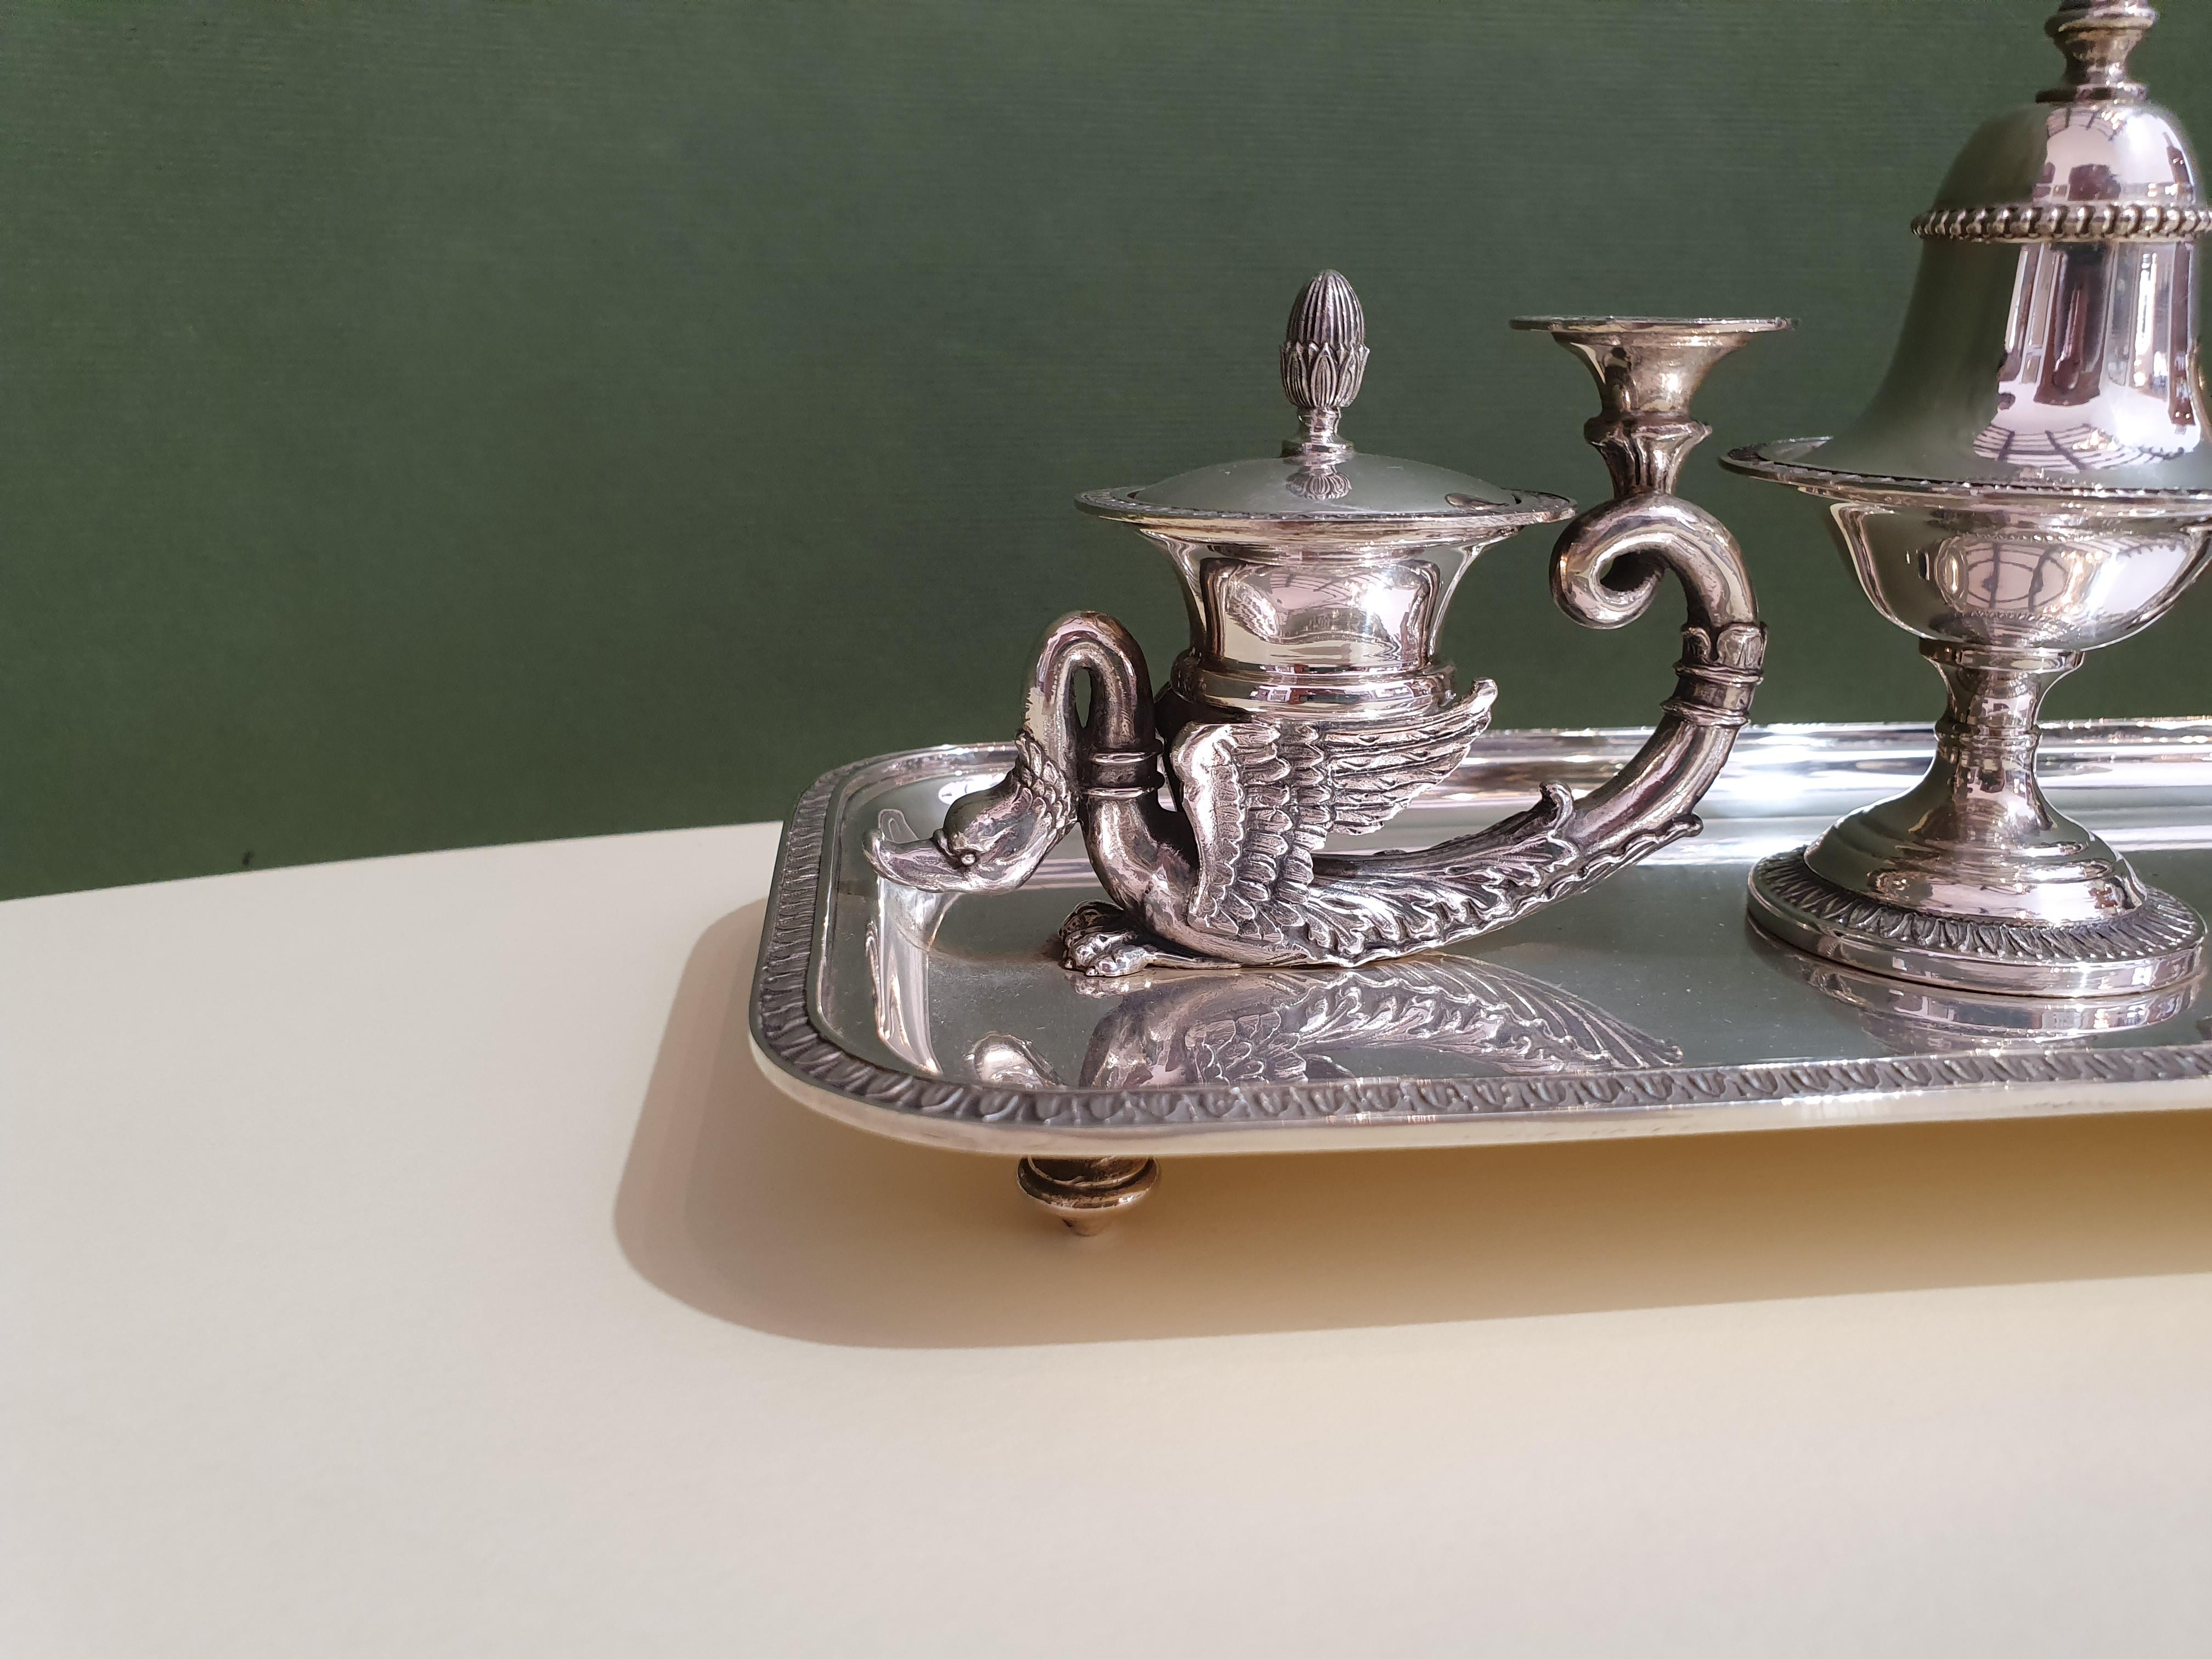 Wonderful handcrafted sterling silver inkwell.
A refined piece of Empire style silverware perfect for an extremely elegant home or office.
Made for us by Argenteria Auge, one of the most skilled Milanese silversmiths of the 20th century, now no